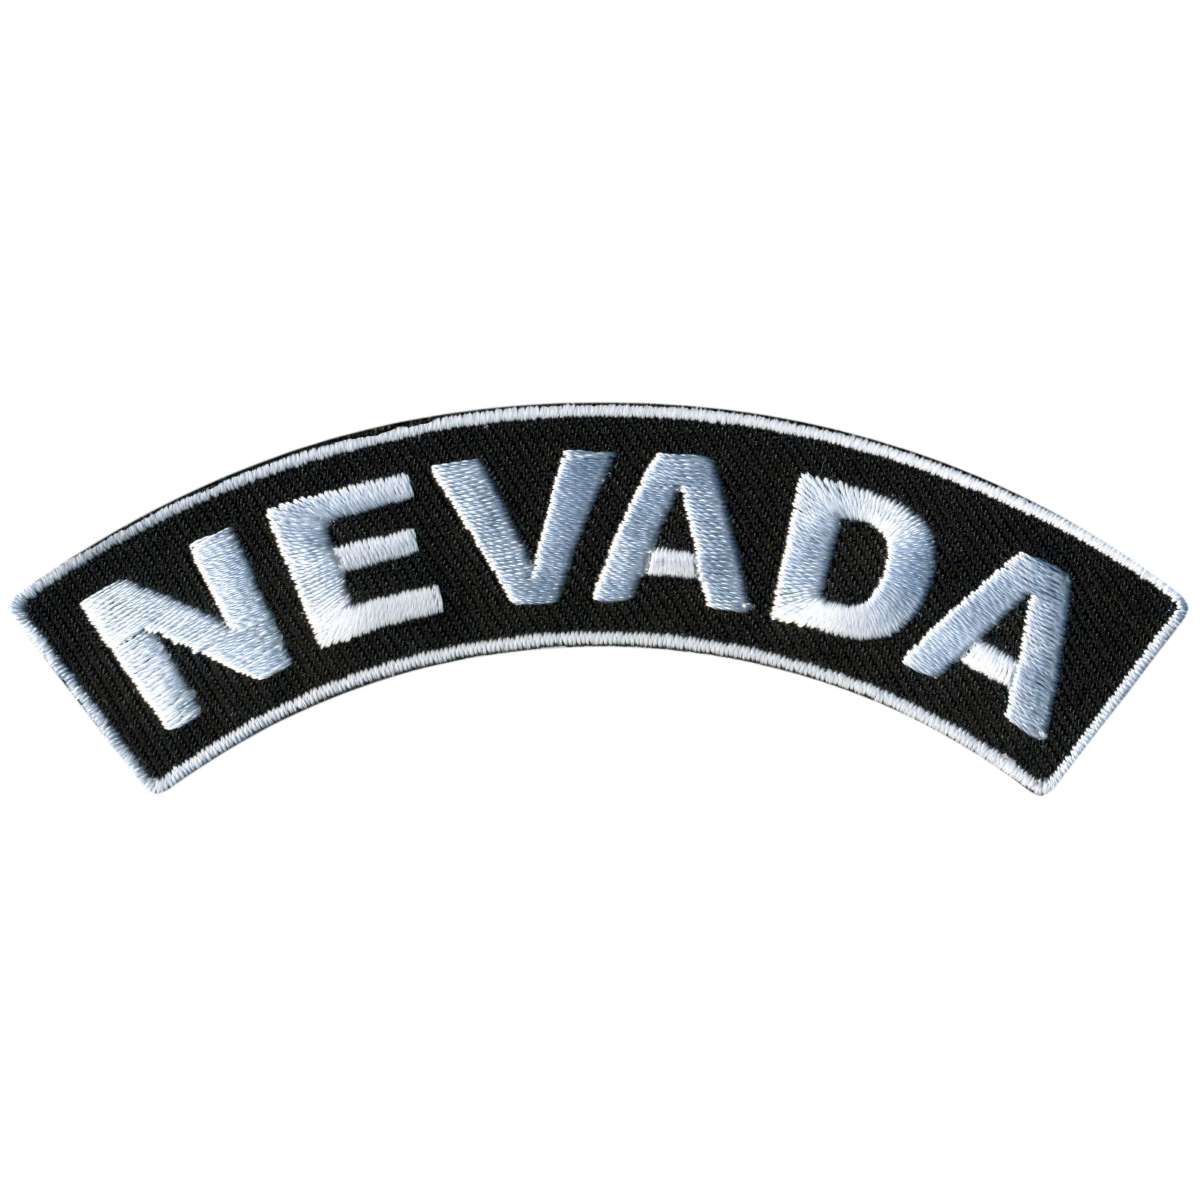 Hot Leathers Nevada  4" X 1" Top Rocker Patch PPM4056